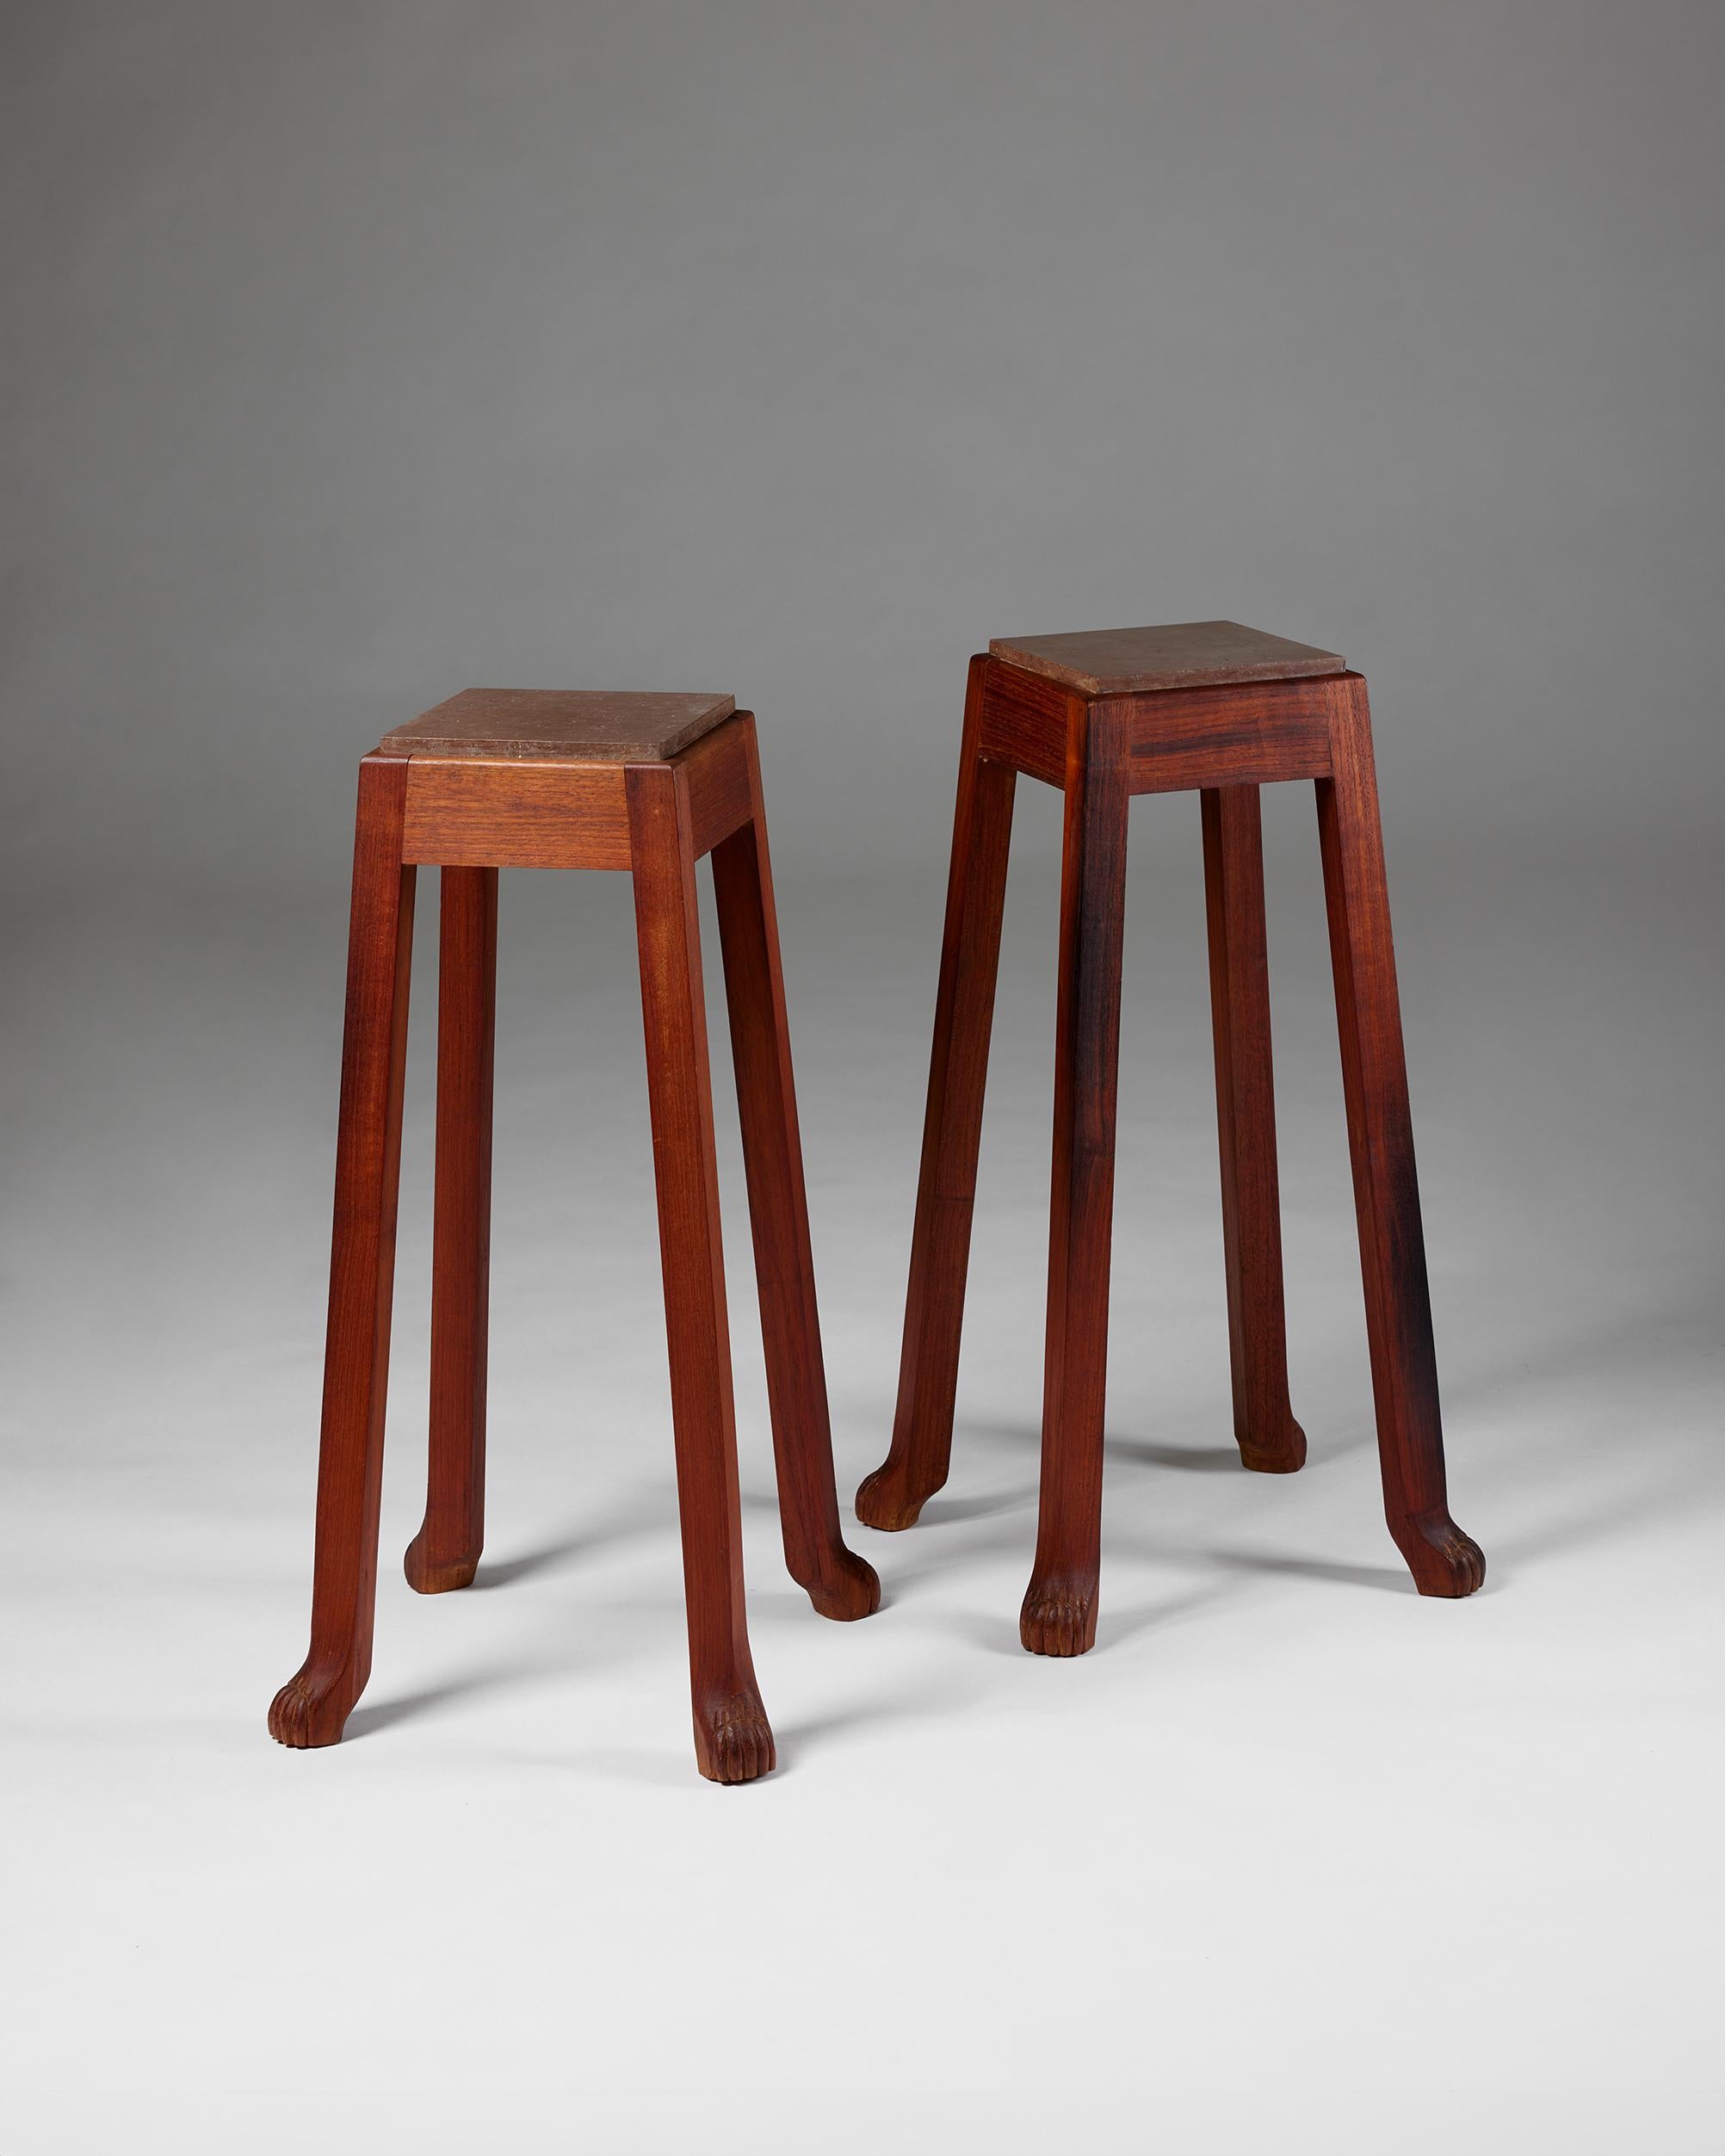 Pair of pedestals for Carl Malmsten’s School,
Sweden, 1970s

Solid teak and limestone.